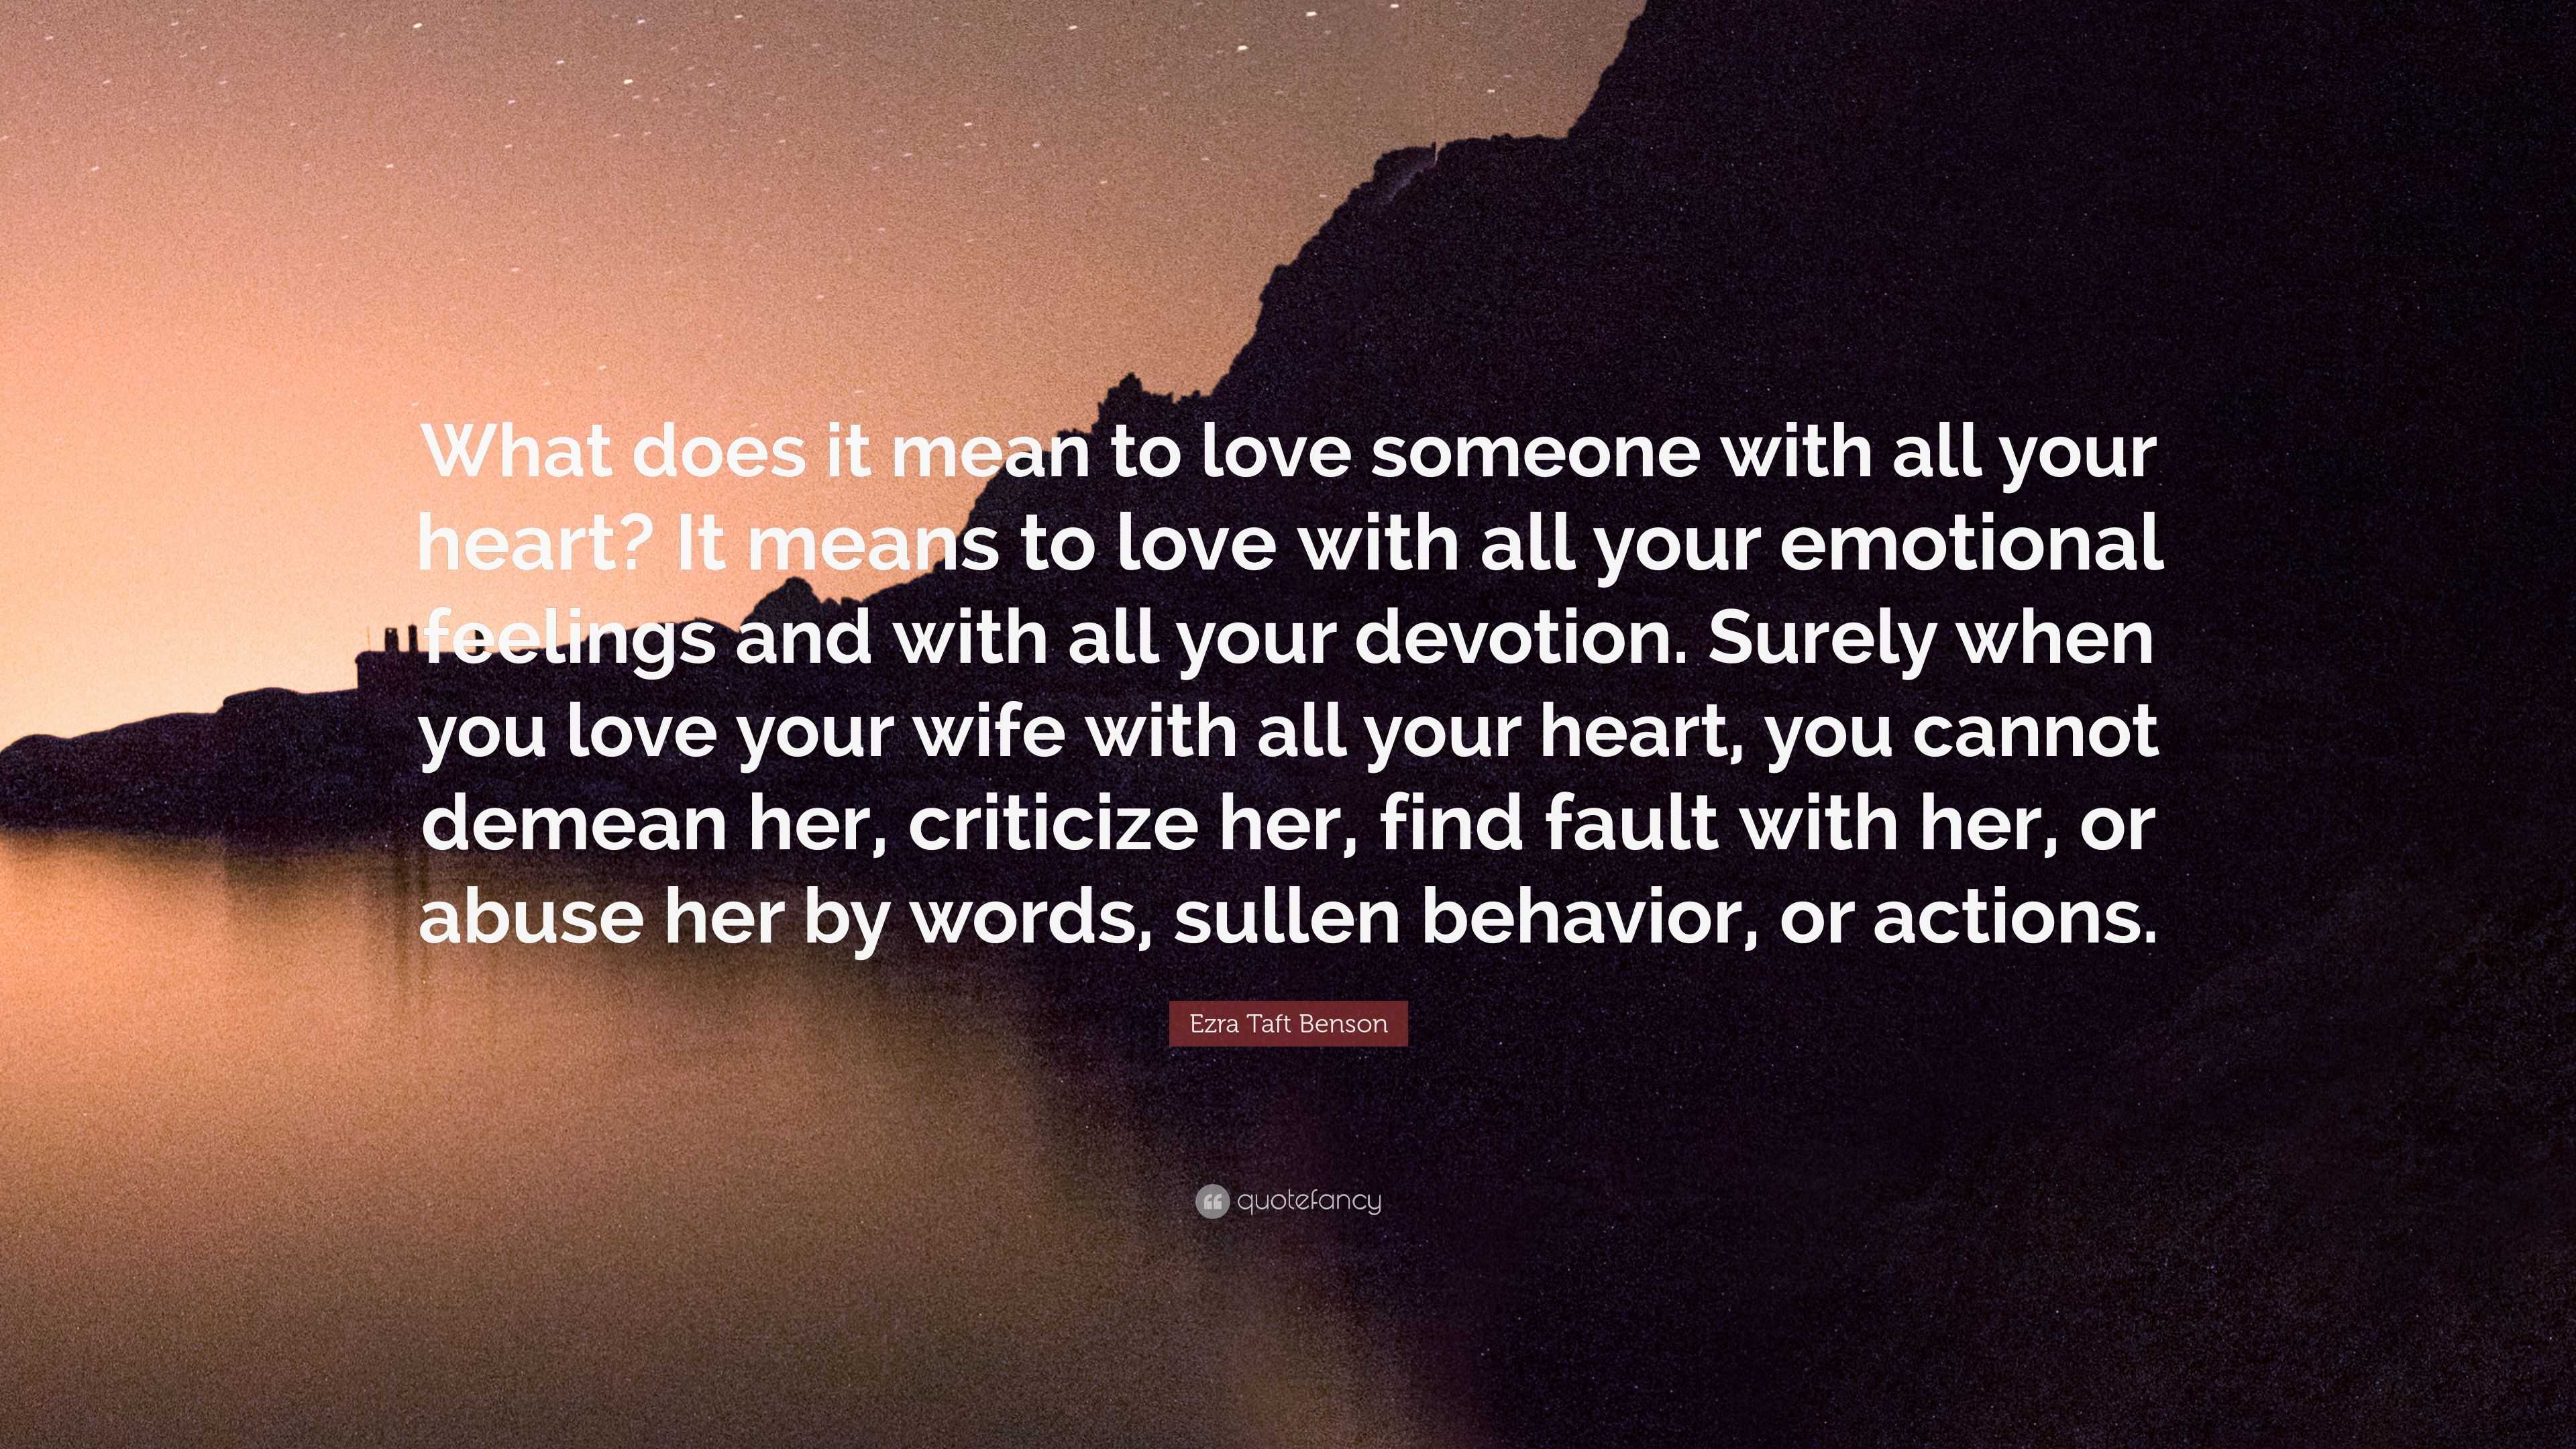 Ezra Taft Benson Quote “What does it mean to love someone with all your